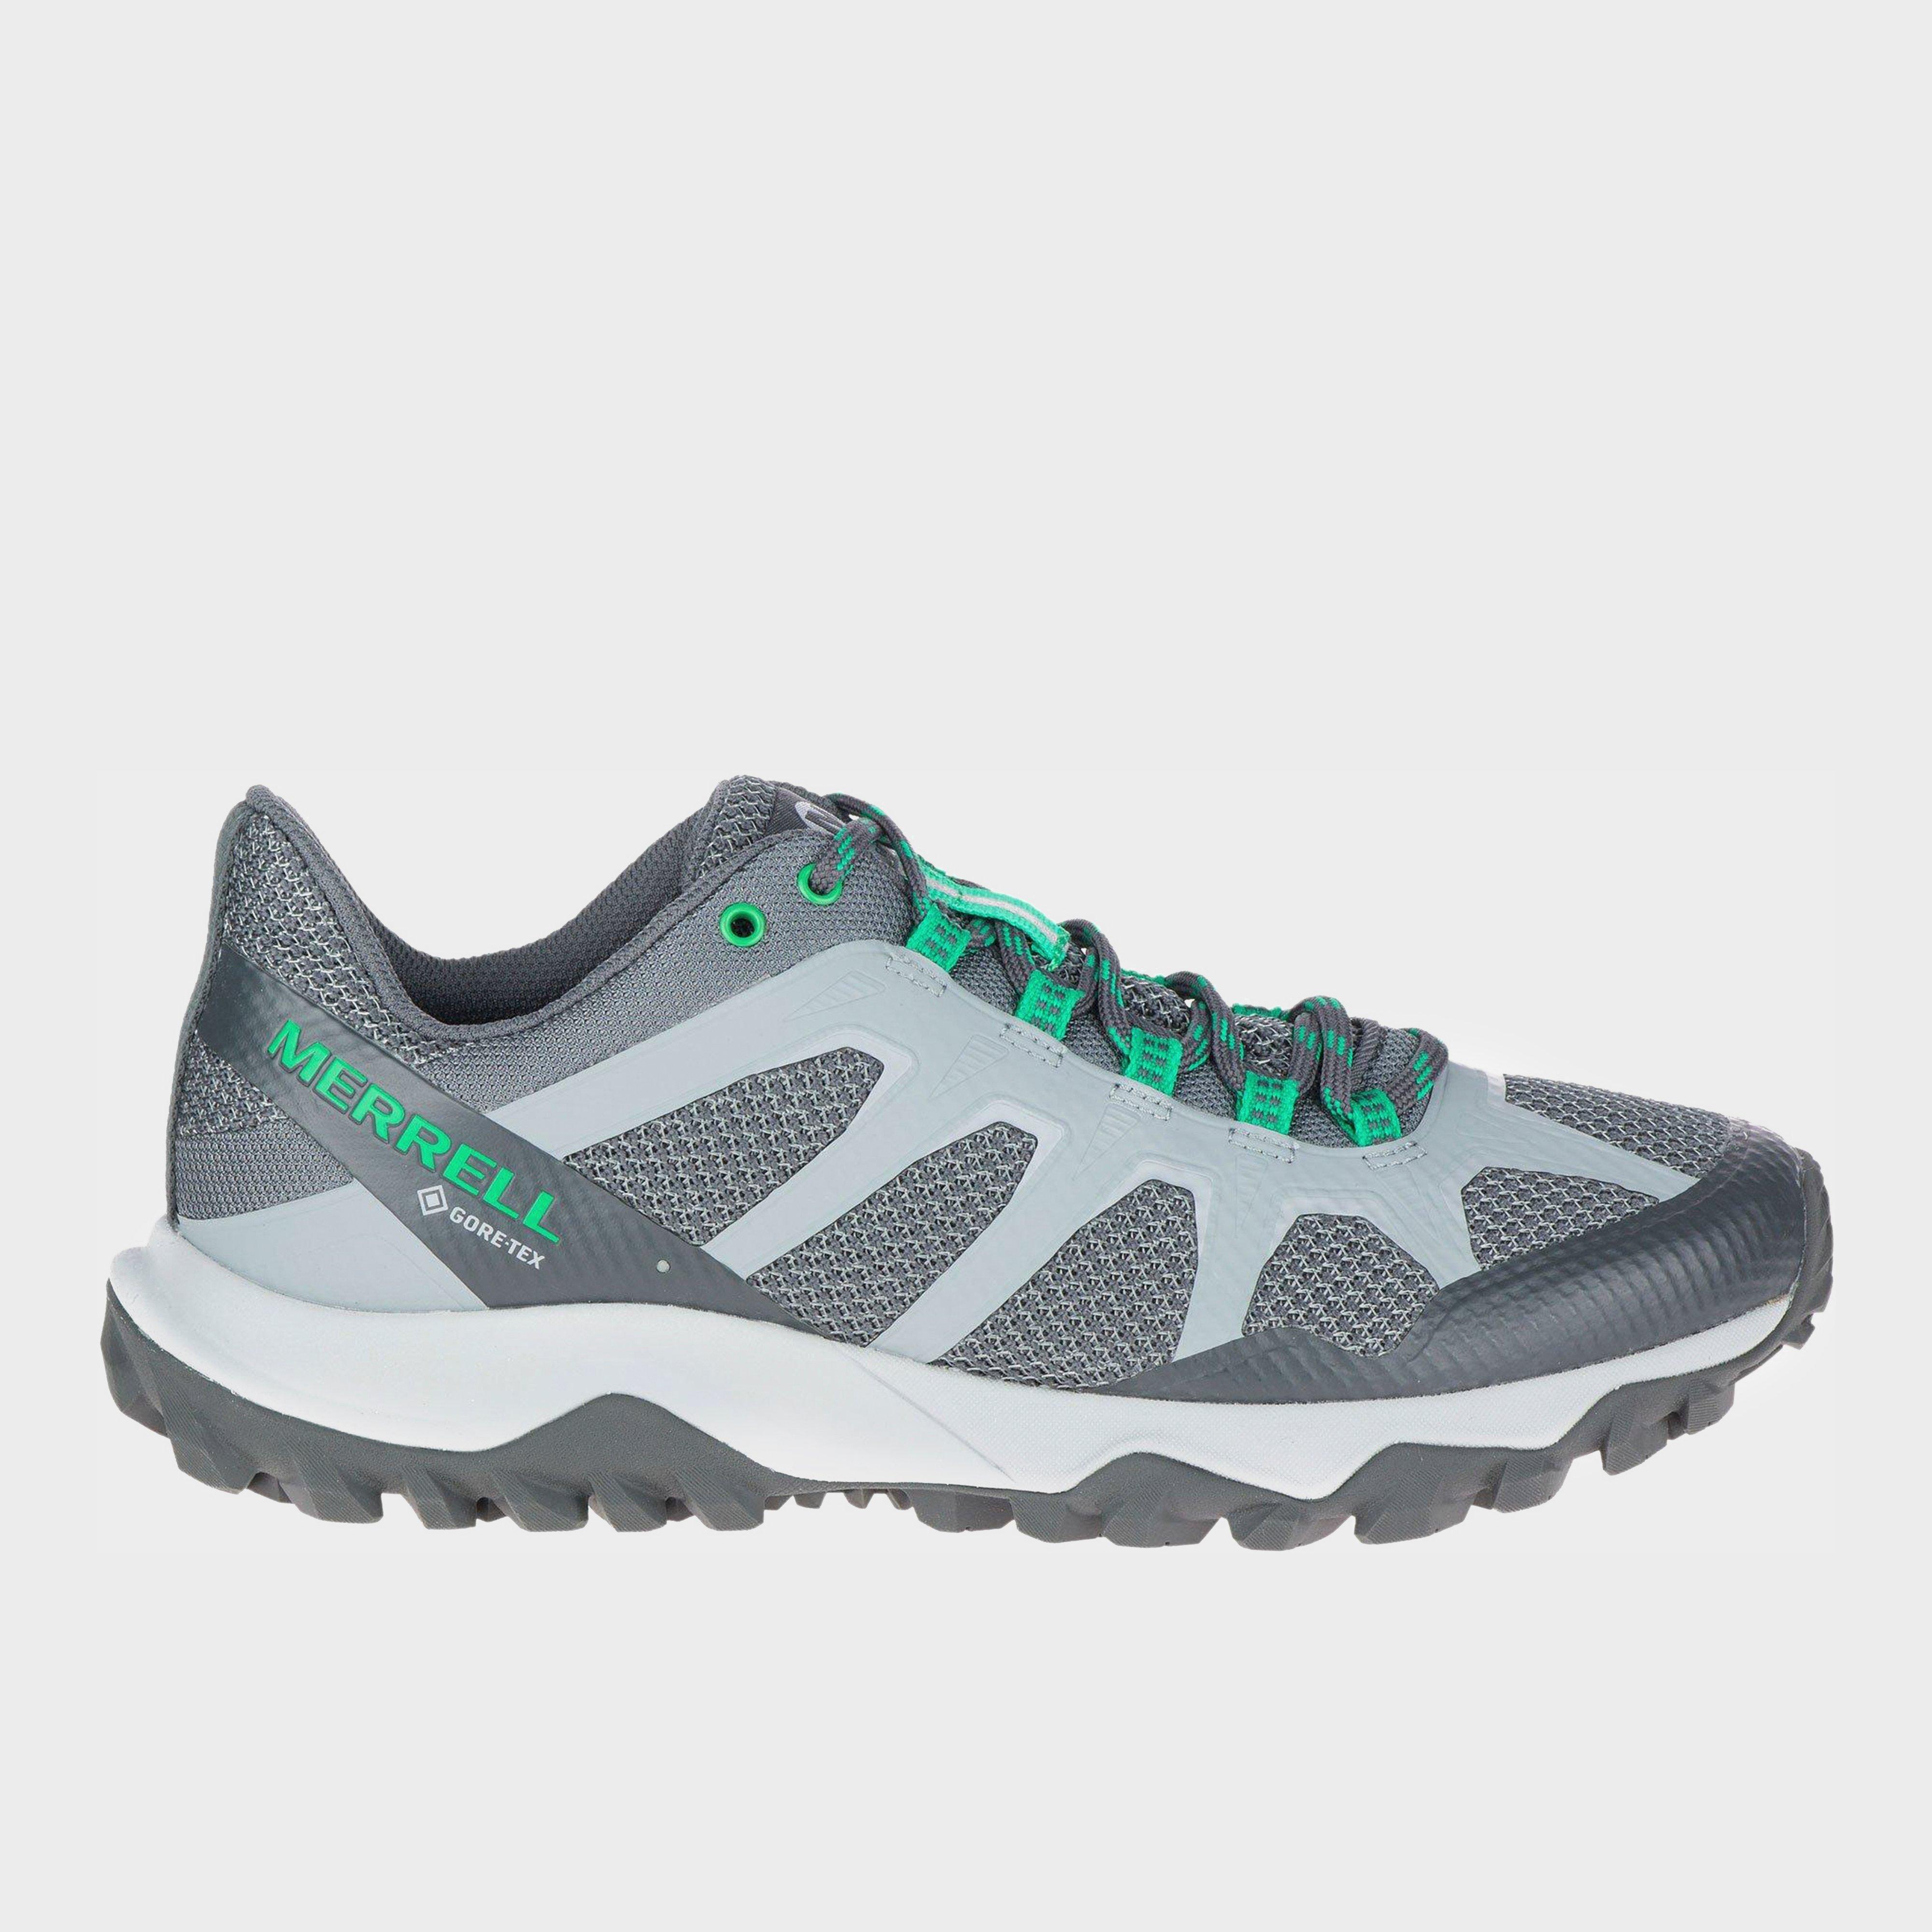 go outdoors merrell walking shoes